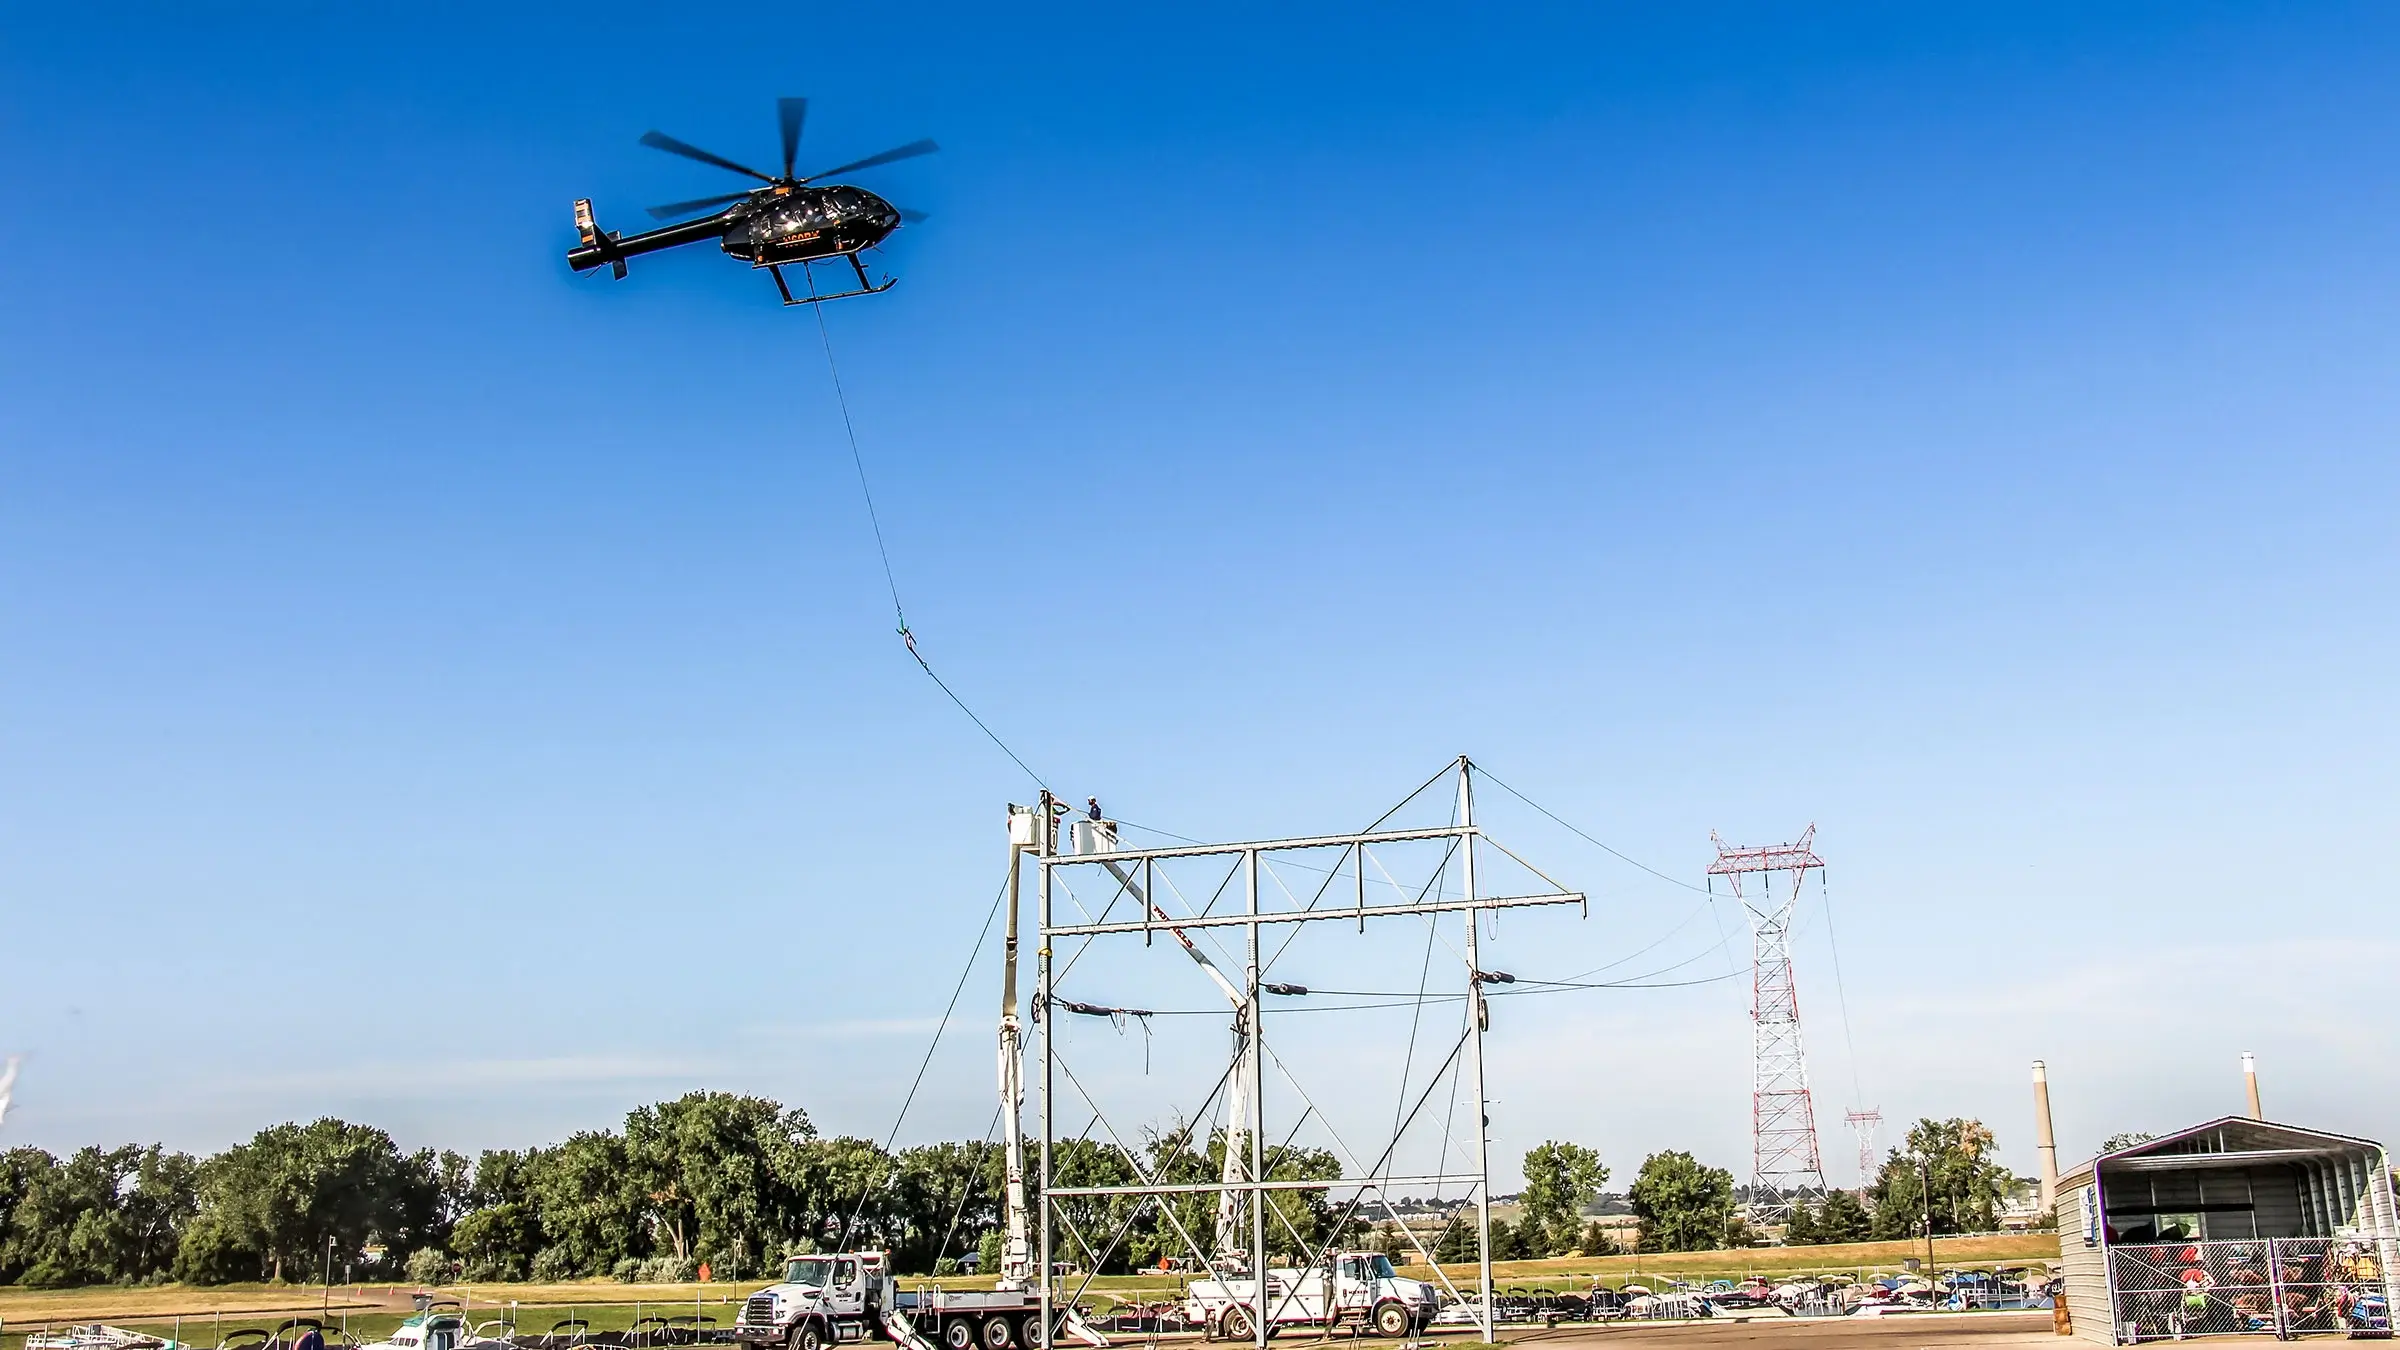 Two bucket trucks and a helicopter operate on large power lines.